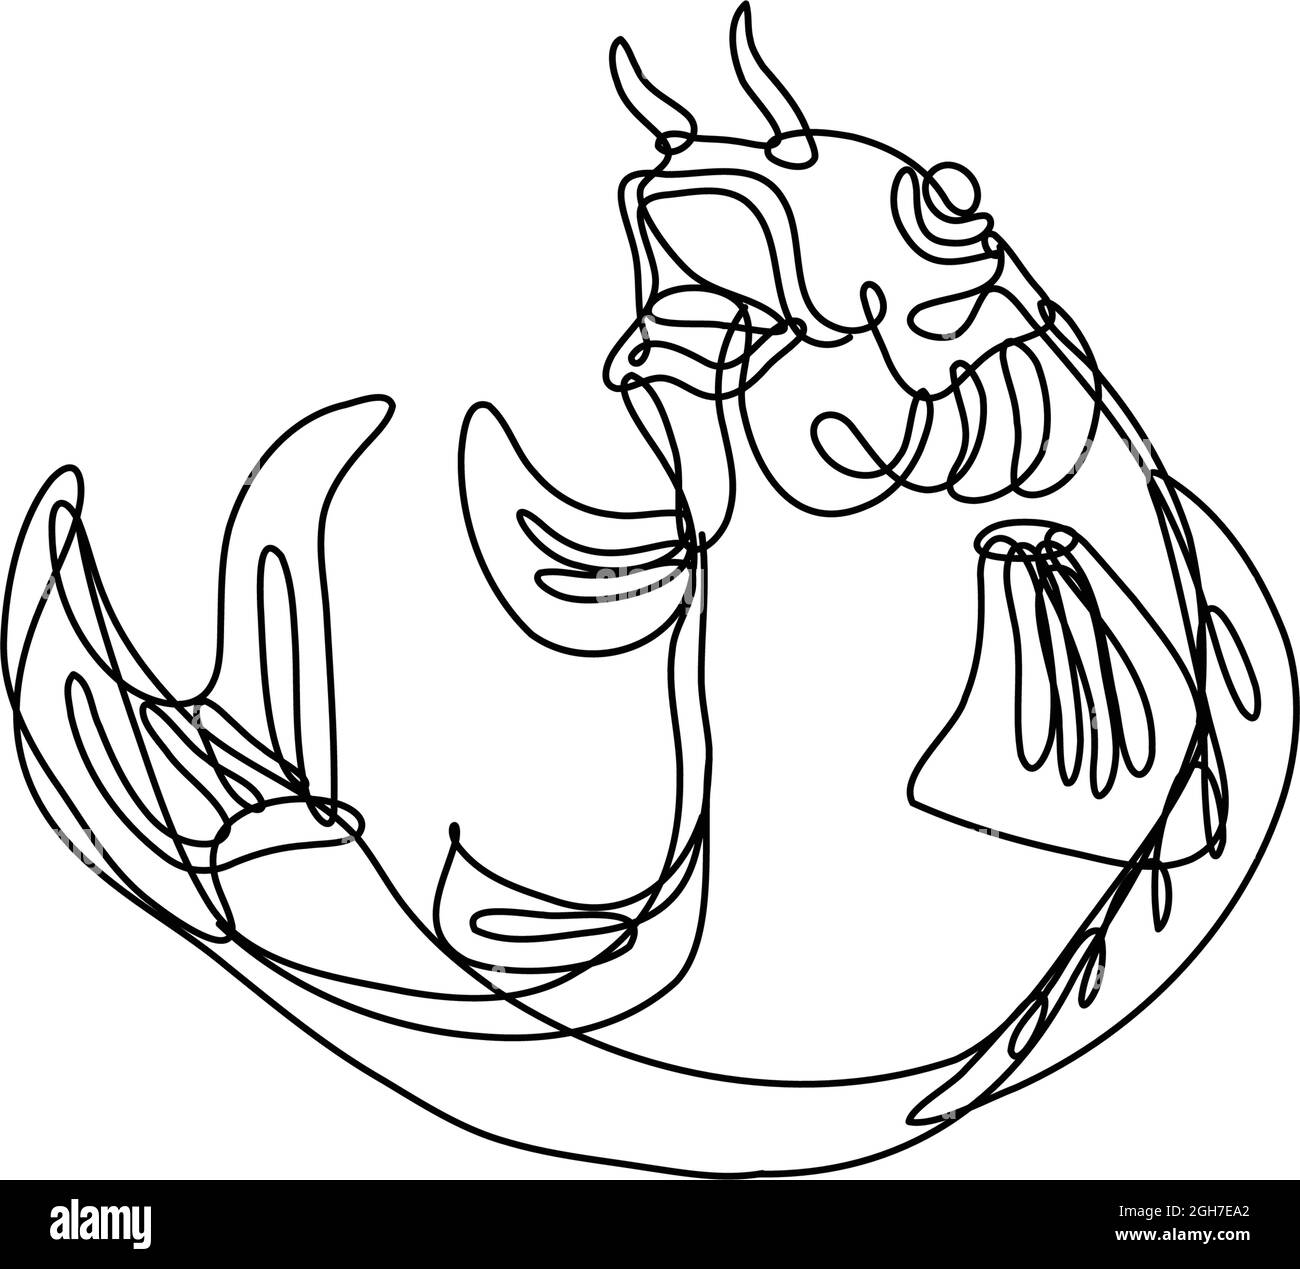 Continuous line drawing illustration of a nishikigoi koi carp fish jumping up done in mono line or doodle style in black and white on isolated backgro Stock Vector